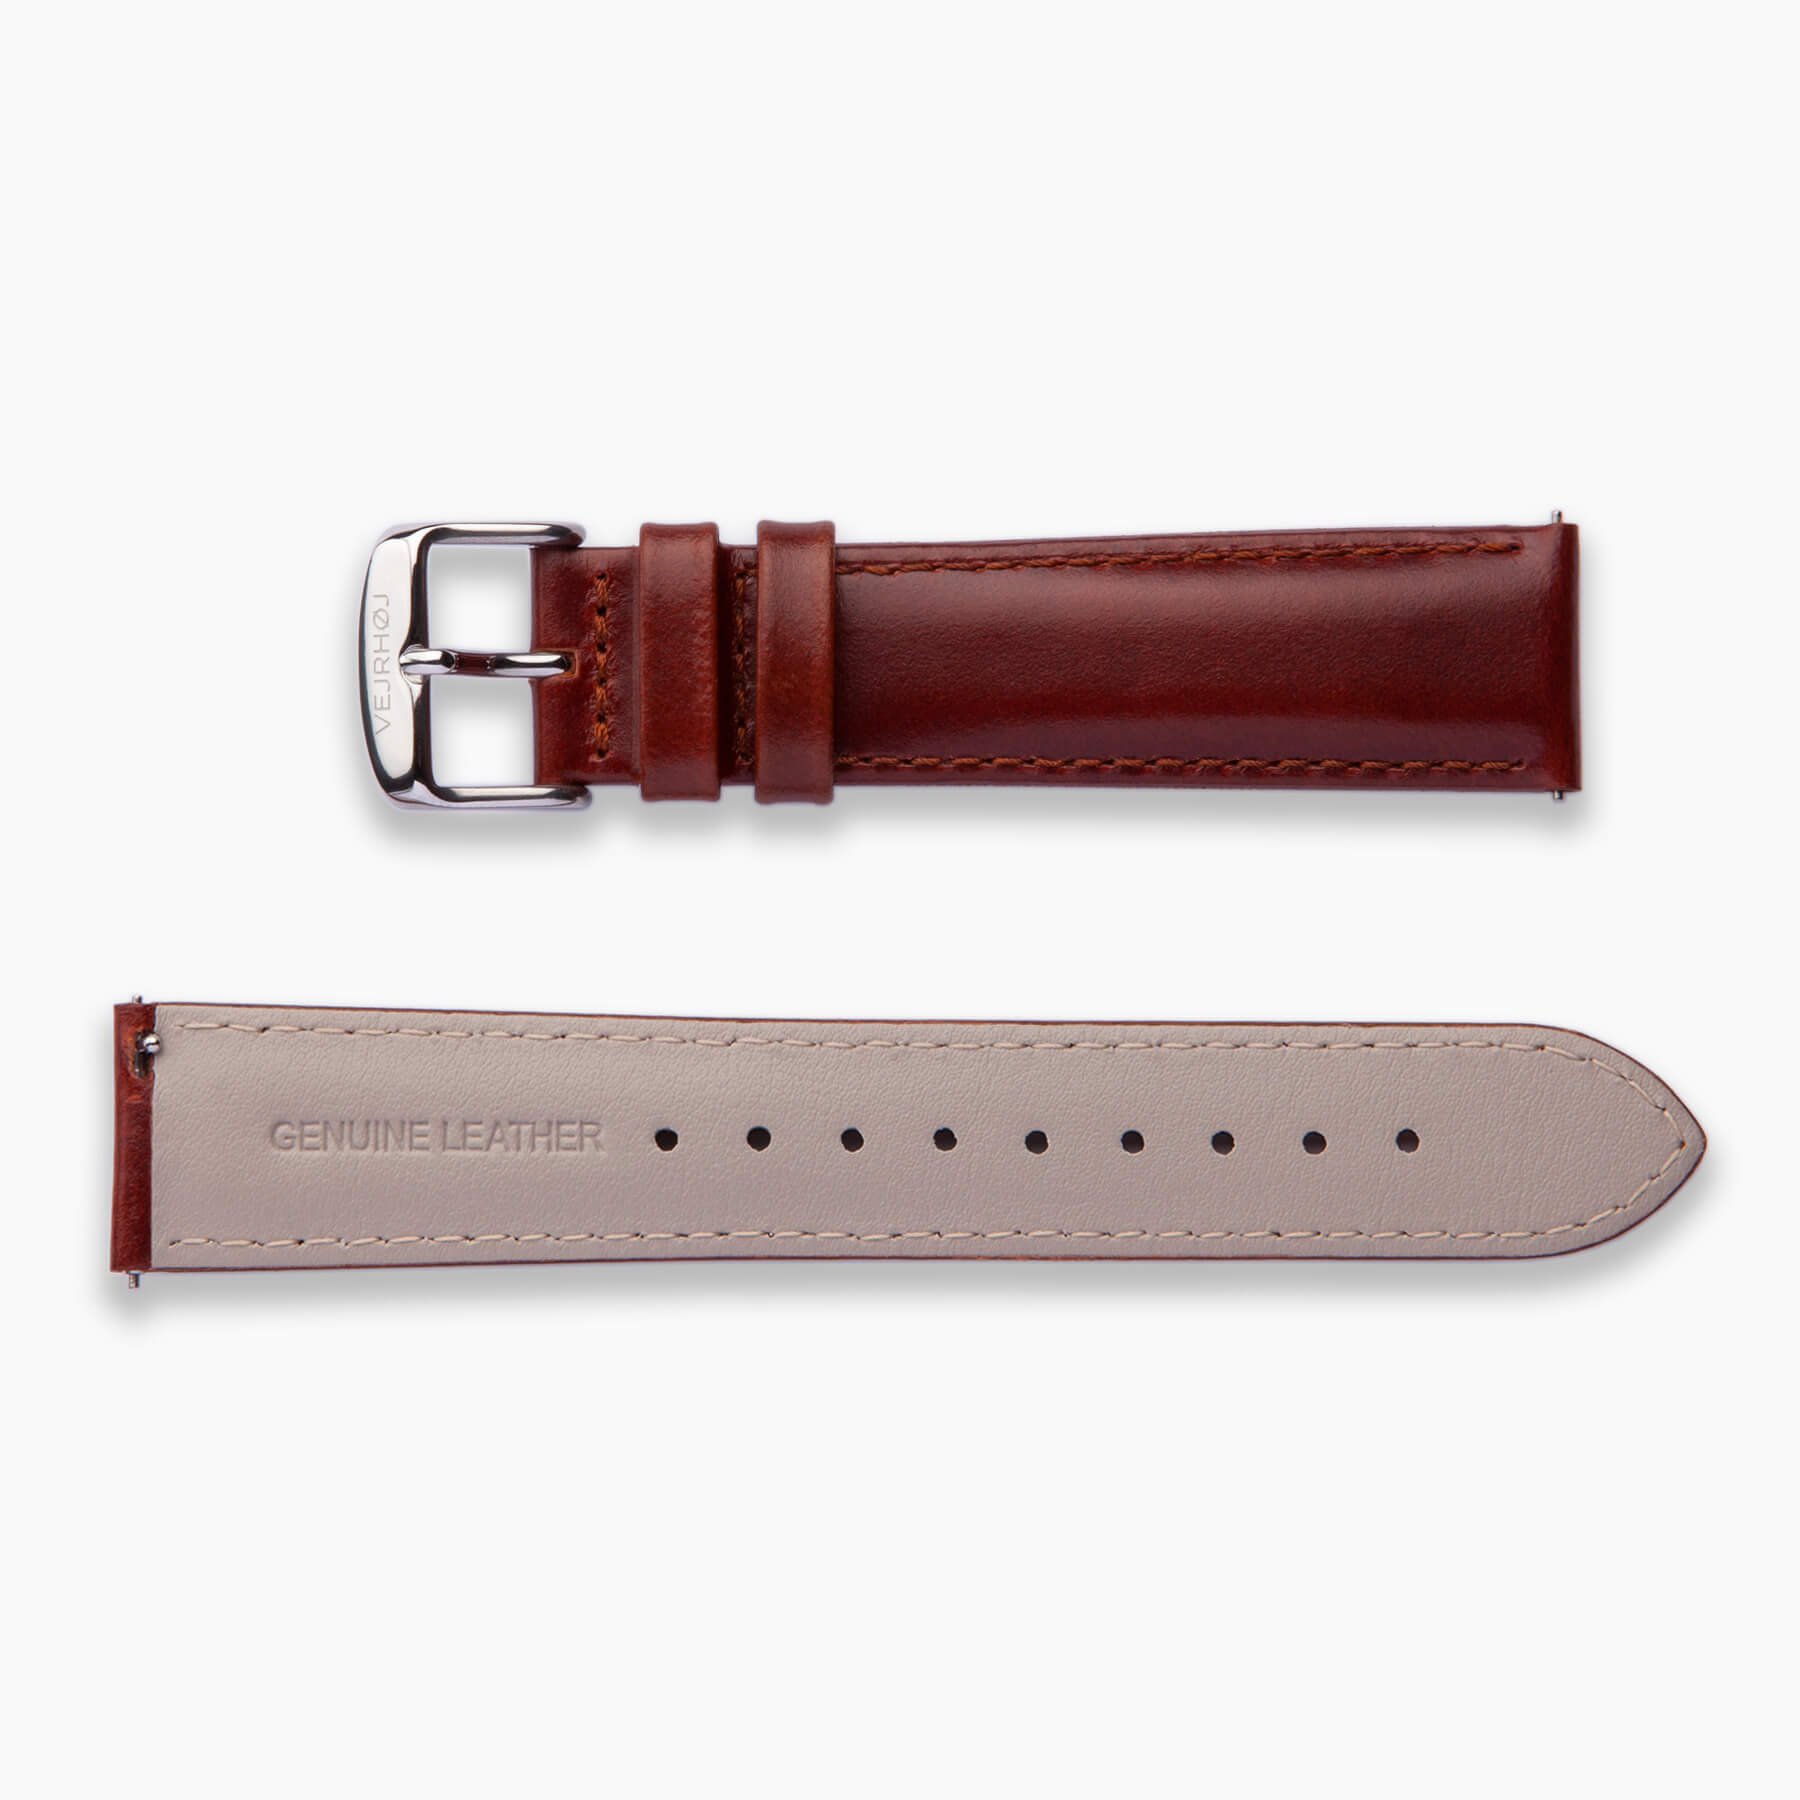 Mahogany strap with Silver buckle